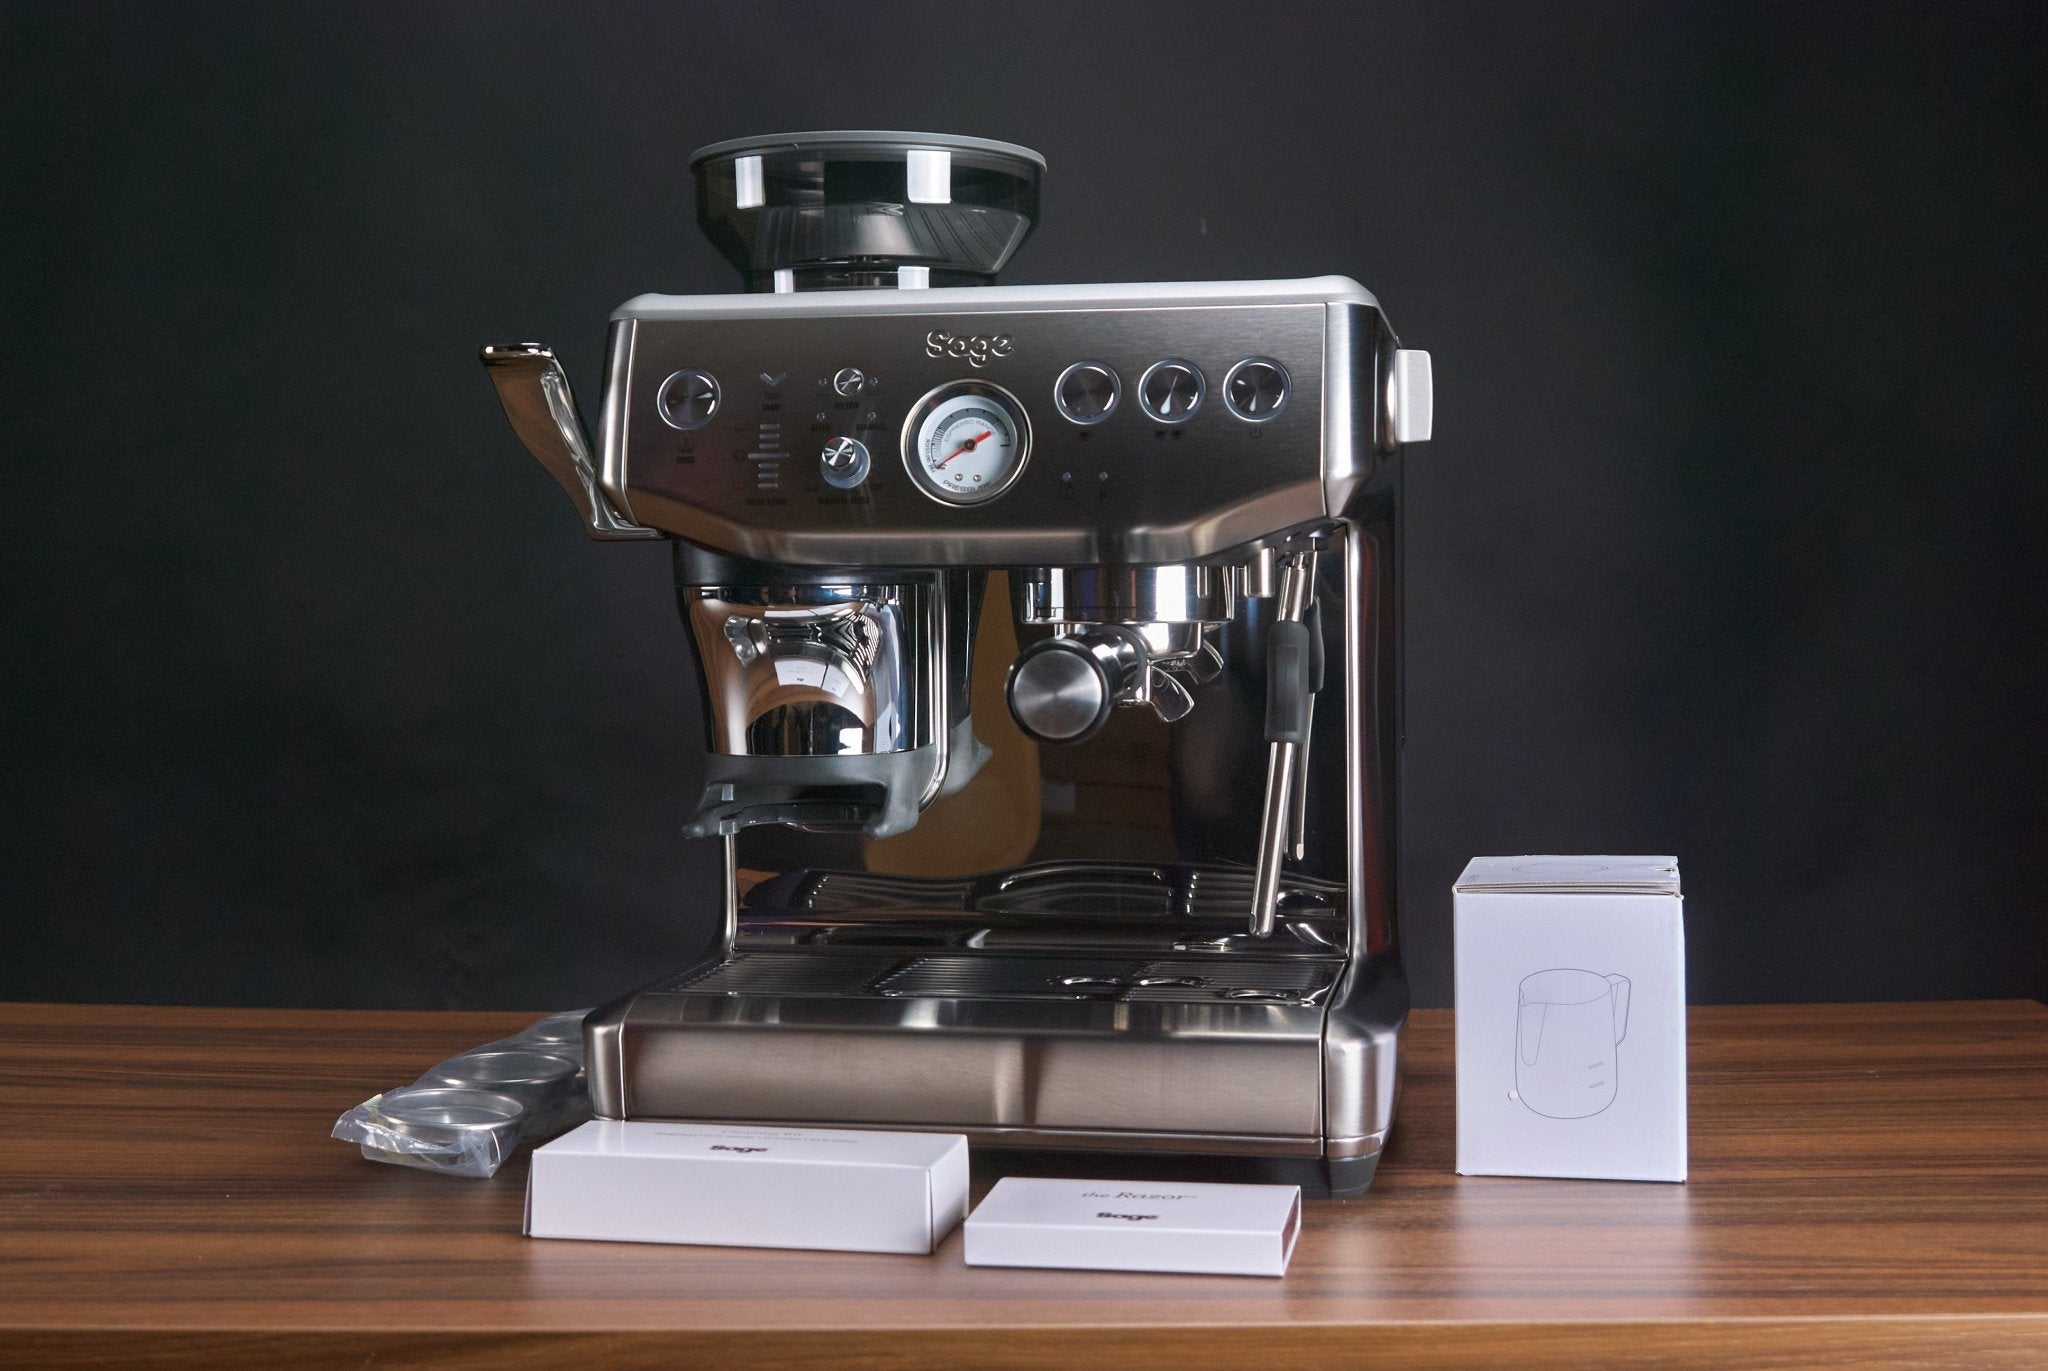 Buy Your Sage Barista Express Impress at NOMAD COFFEE – Nomad Coffee